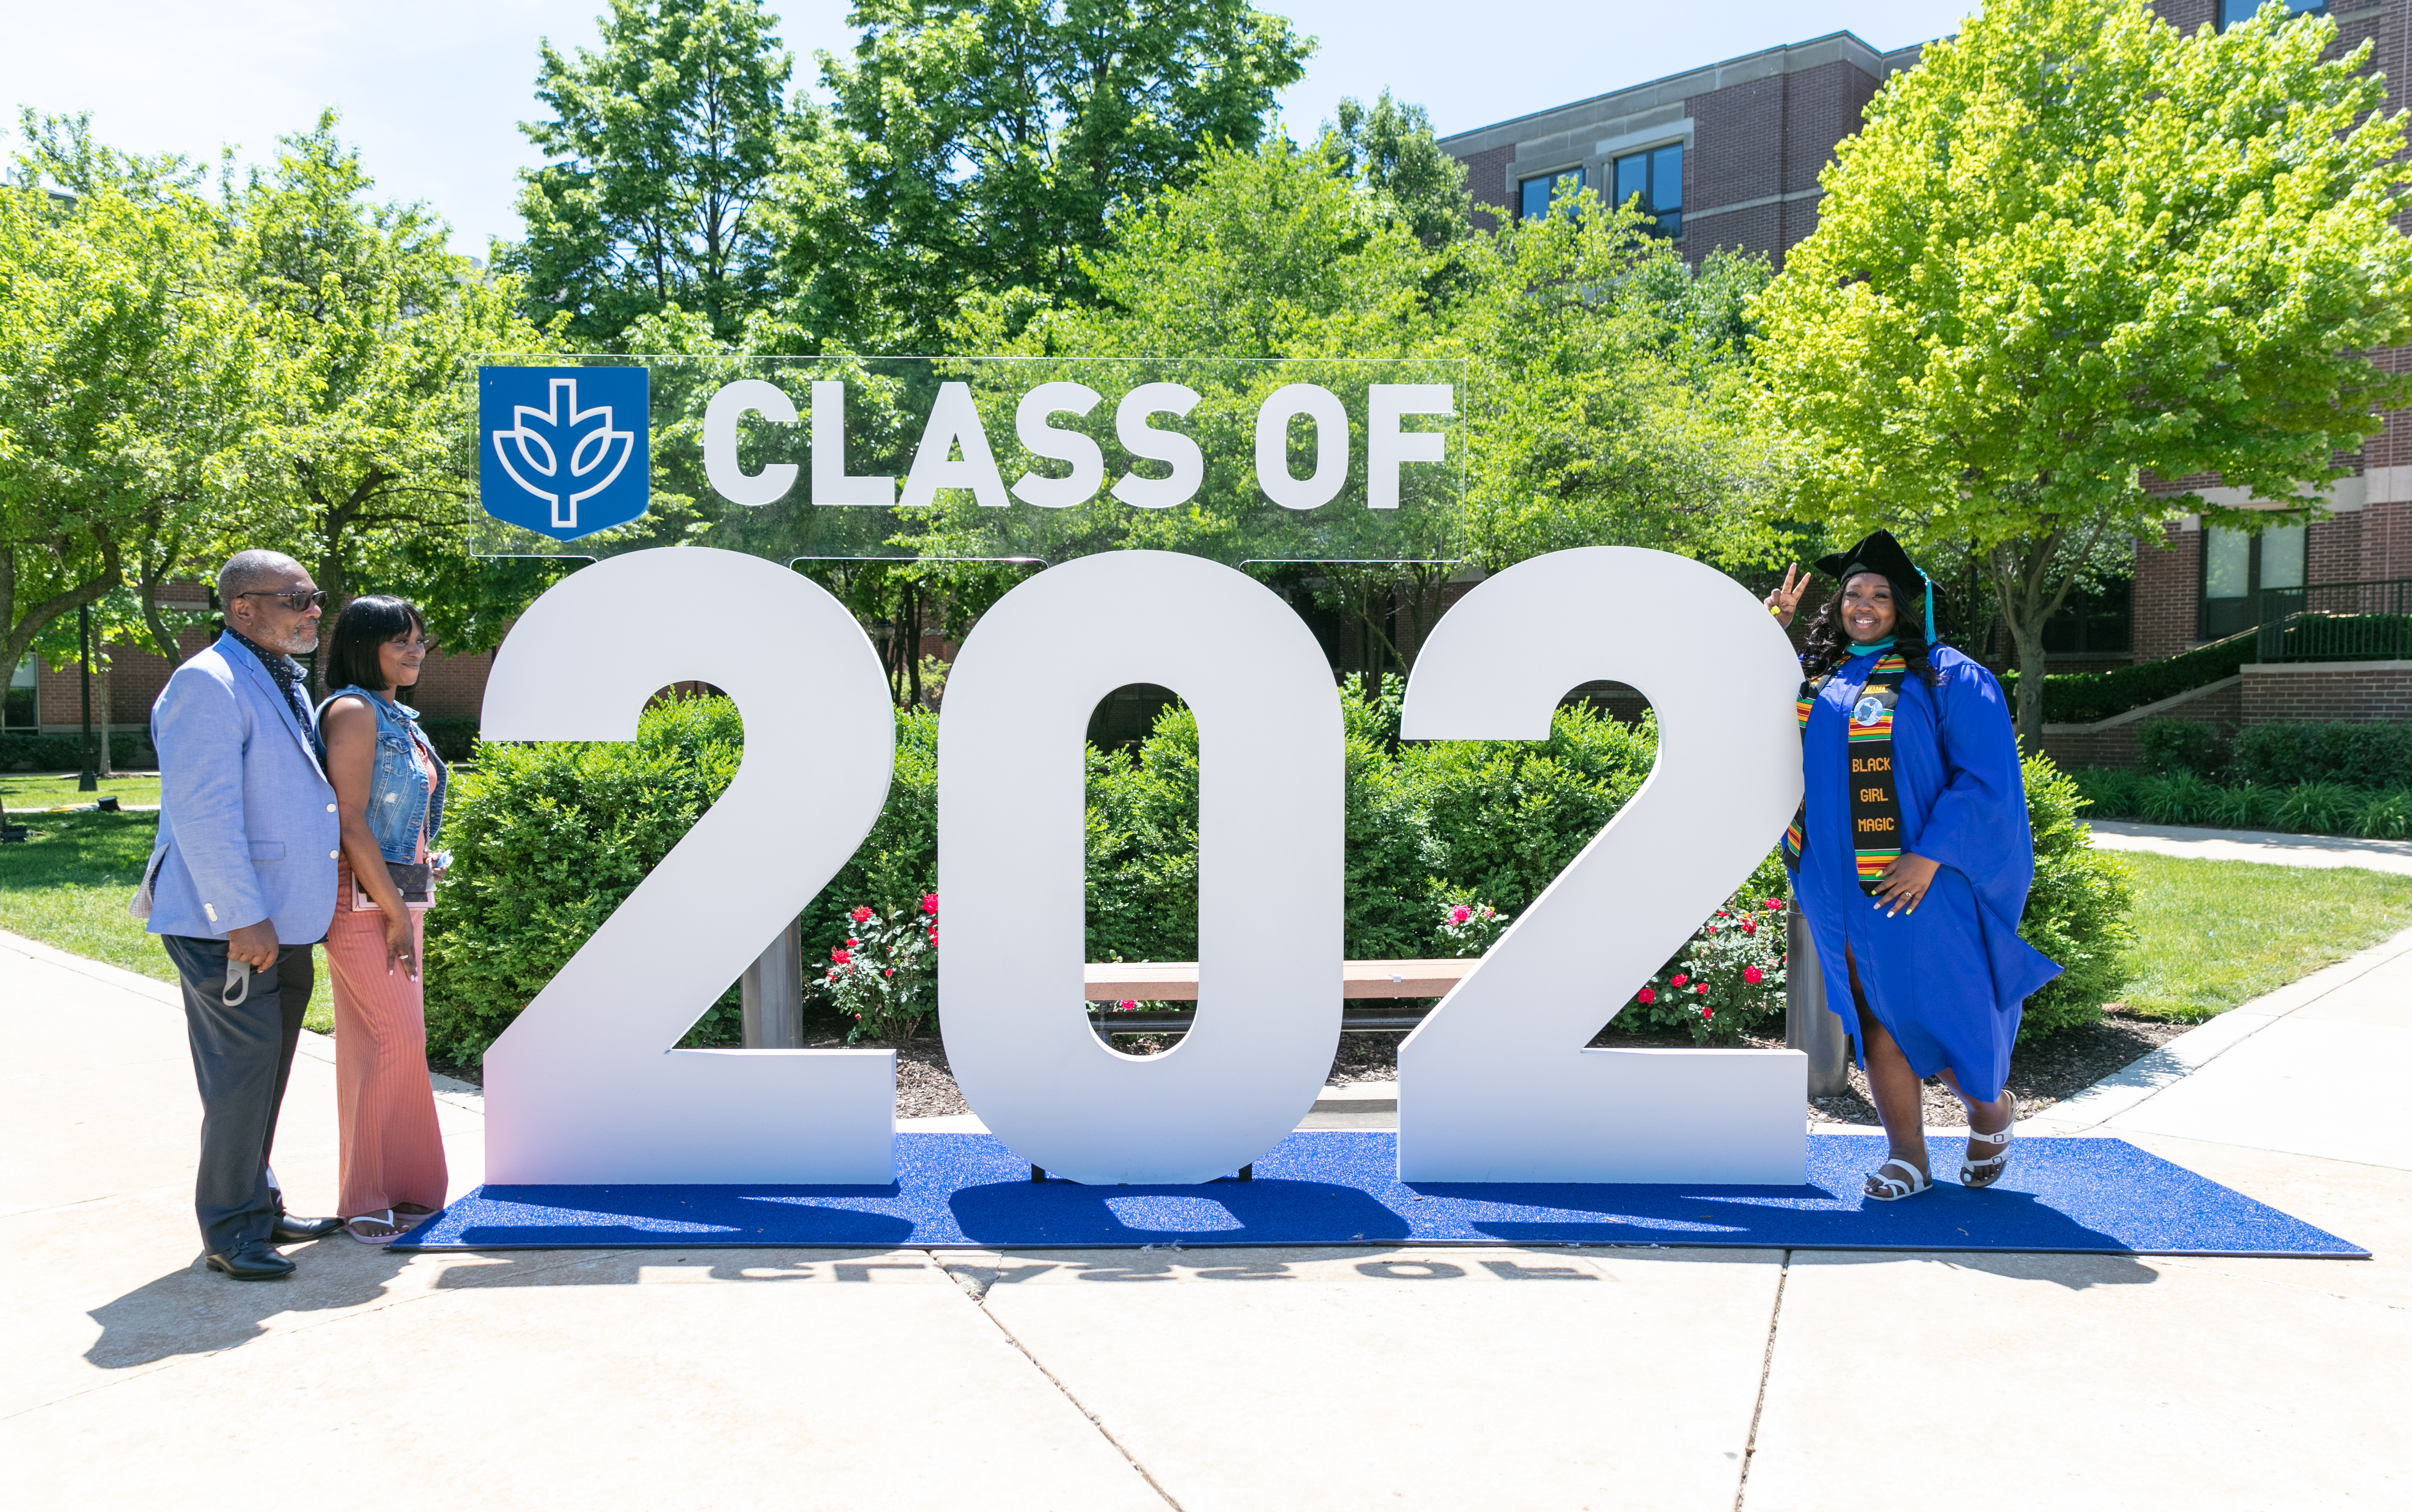 Graduation Celebration - An on-campus experience for the Class of 2021